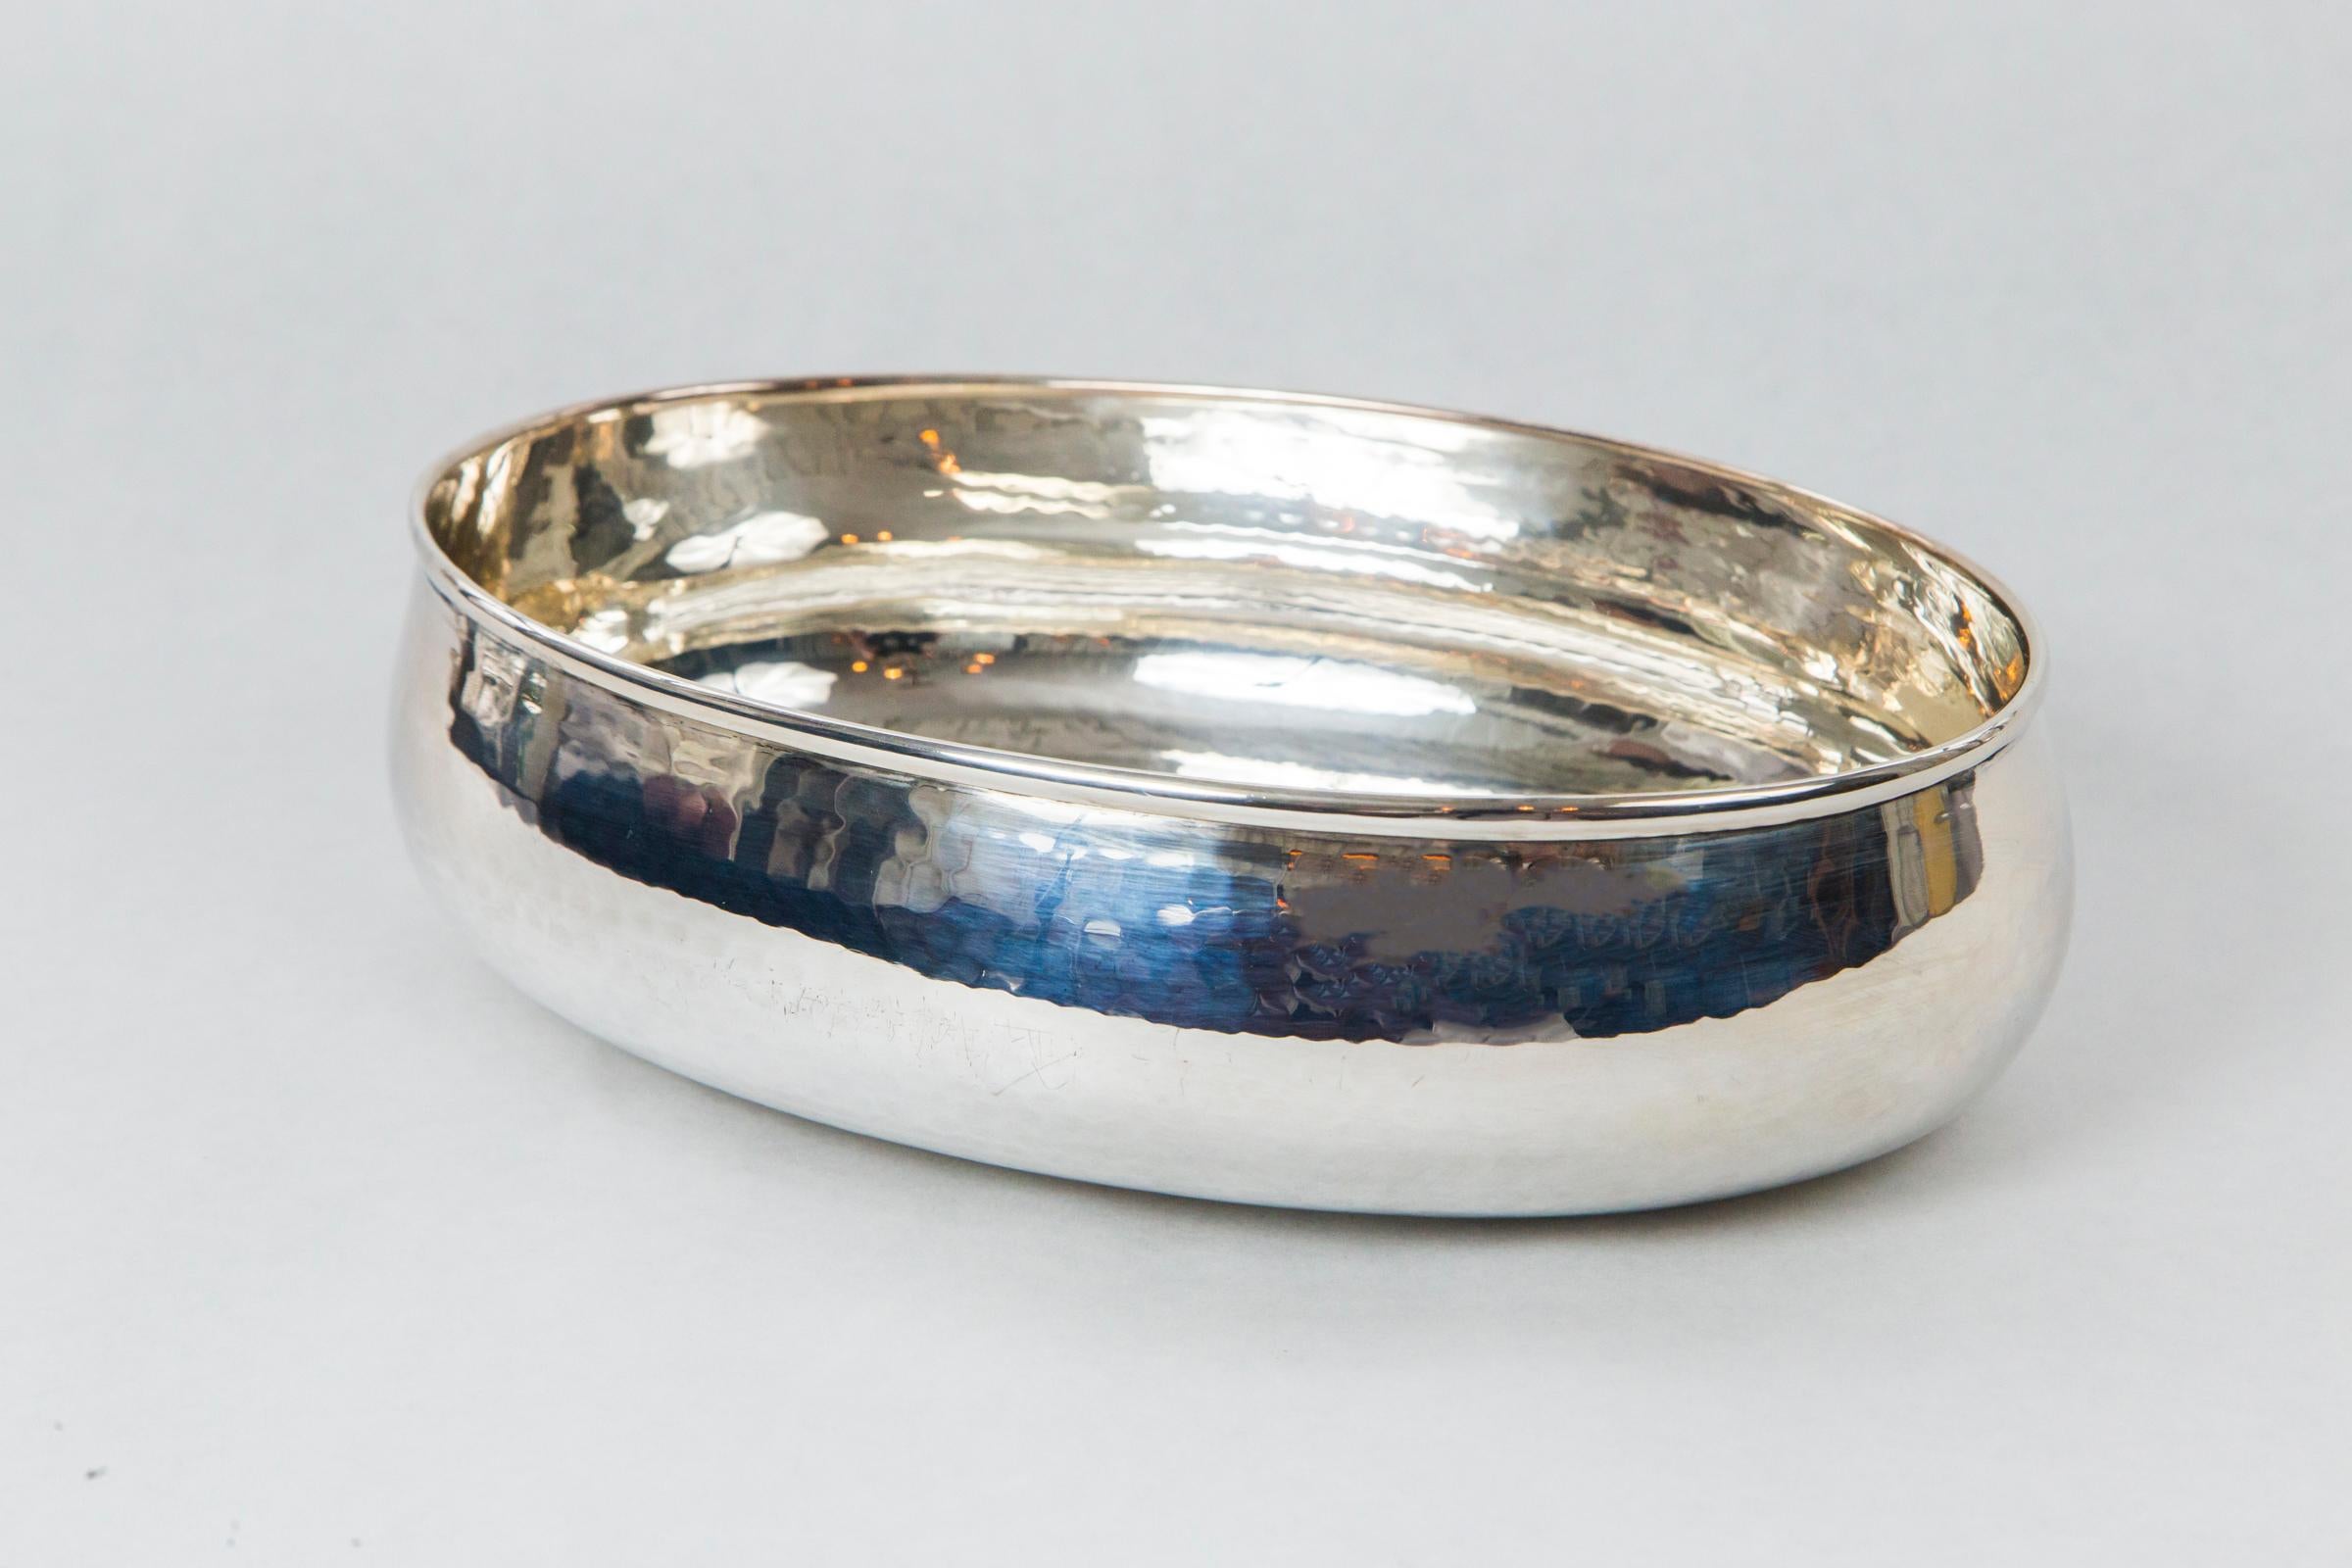 Oval serving bowl with rounded sides, entirely hammered by hand to get a special brightness. Made in the 1990s by the silverware company Zaramella of Padua, active for more than 70 years and well known for its refined and valuable silver